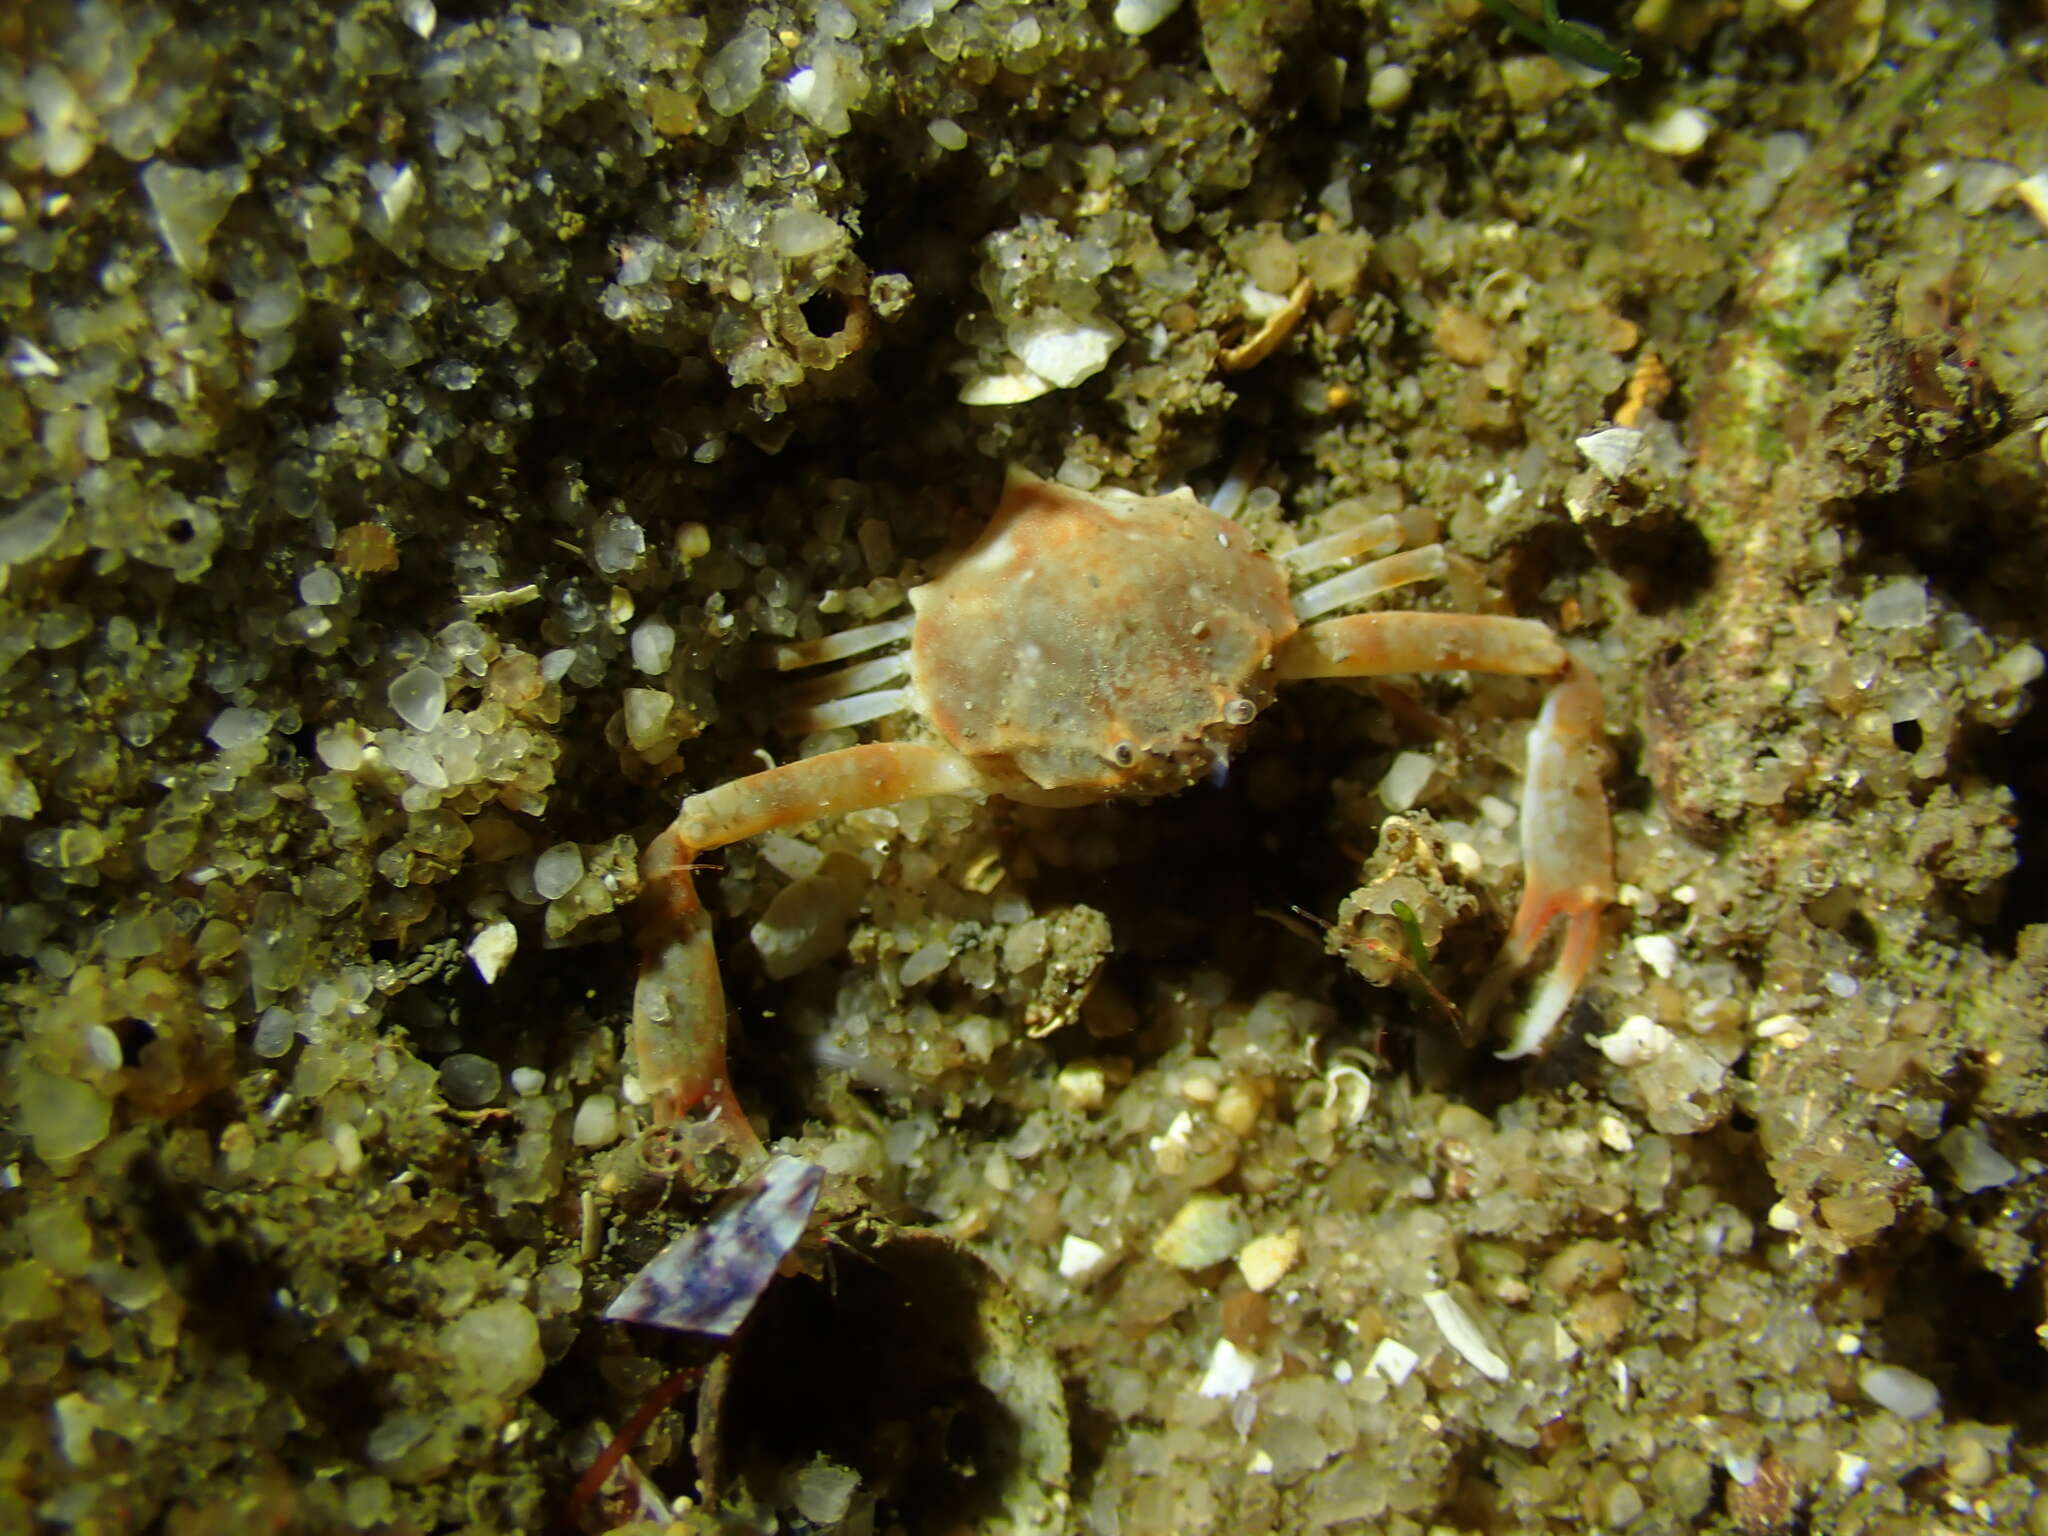 Image of smooth nut crab